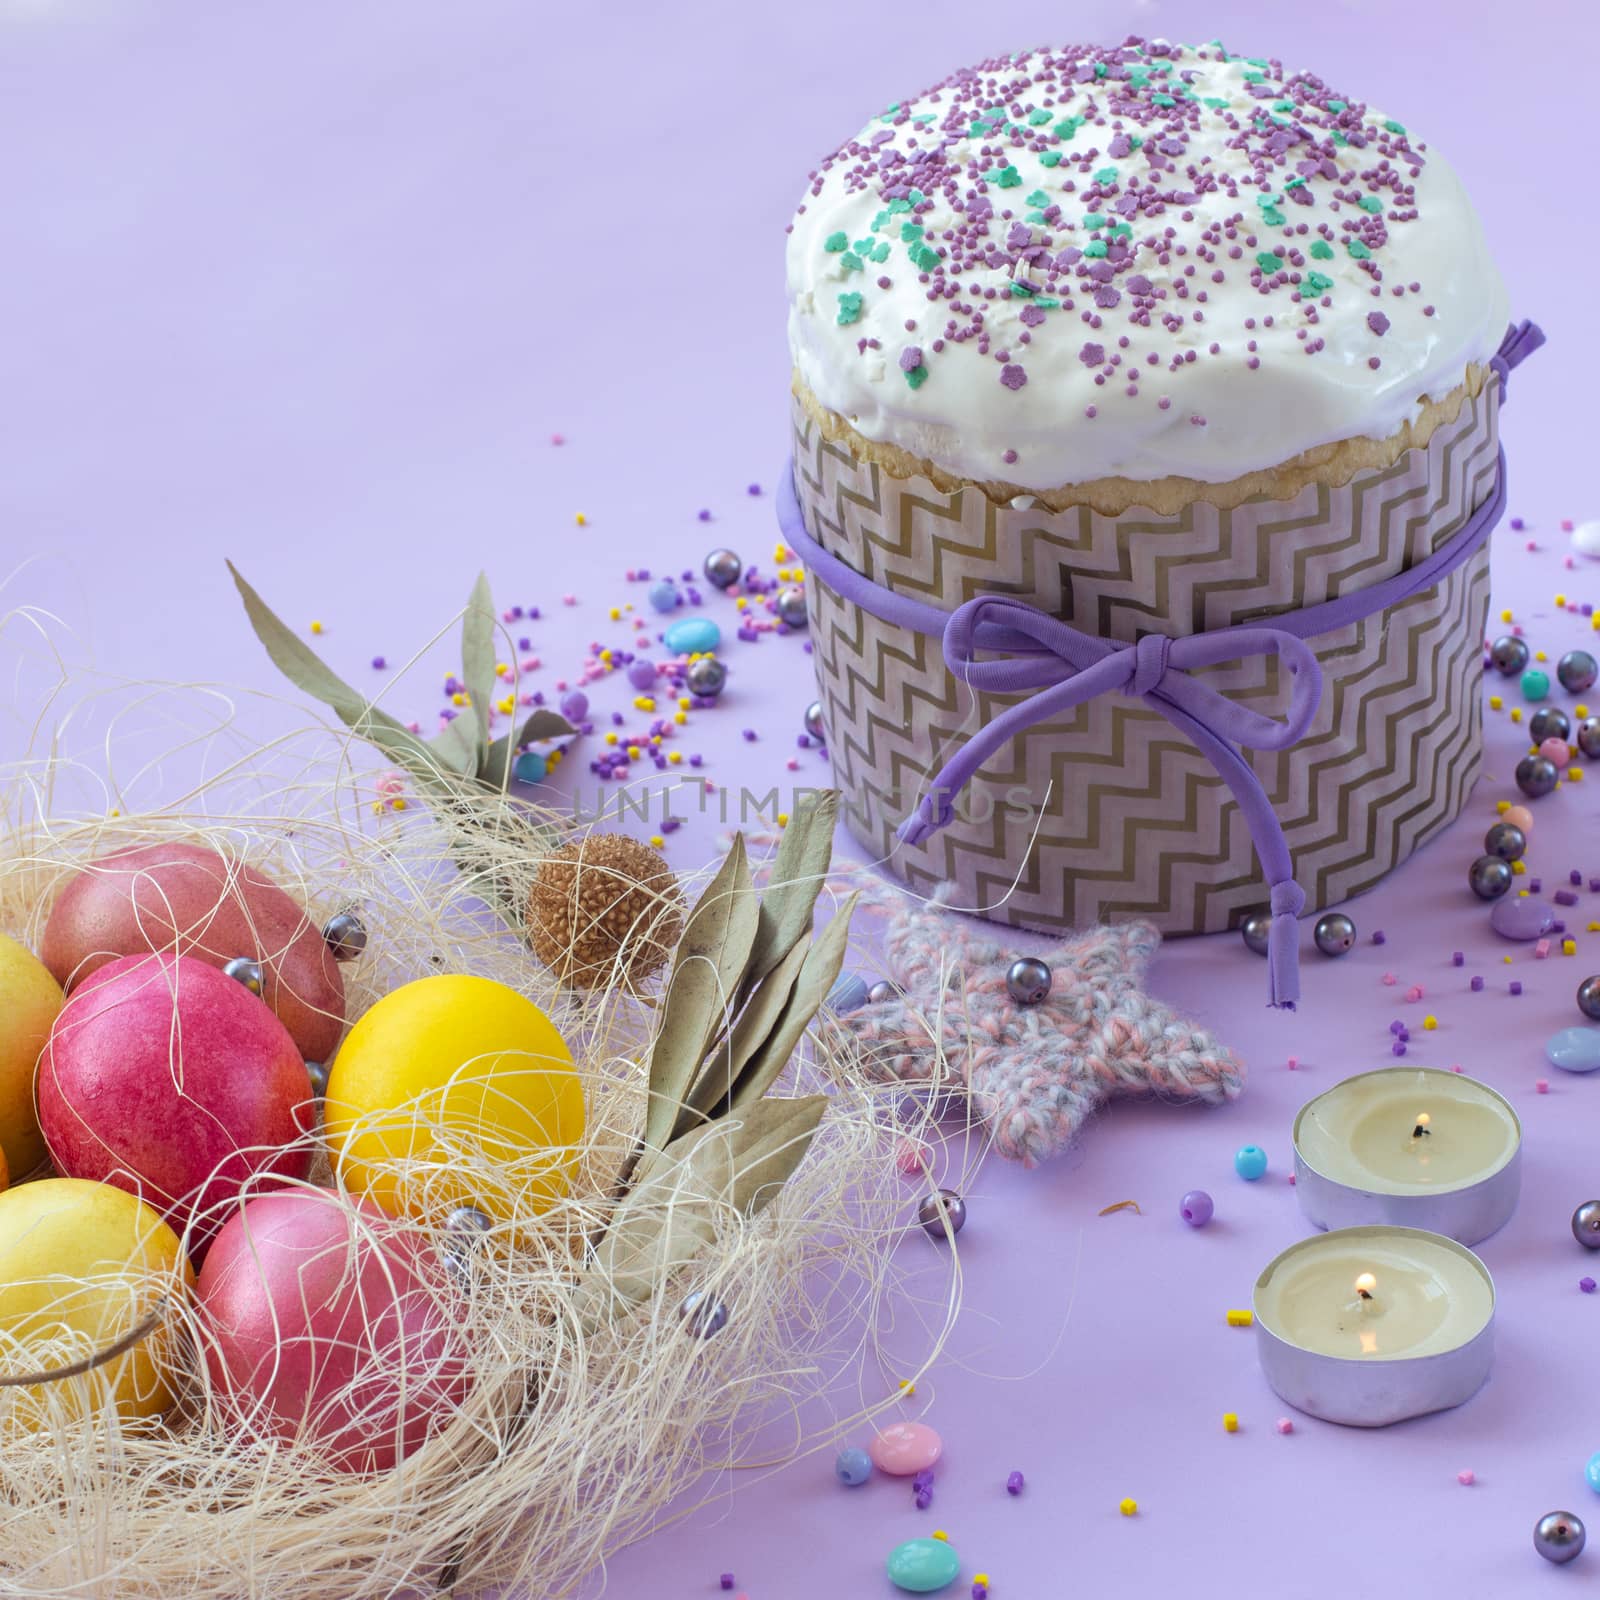 Easter cake and painted eggs beautifully decorated on a lilac background